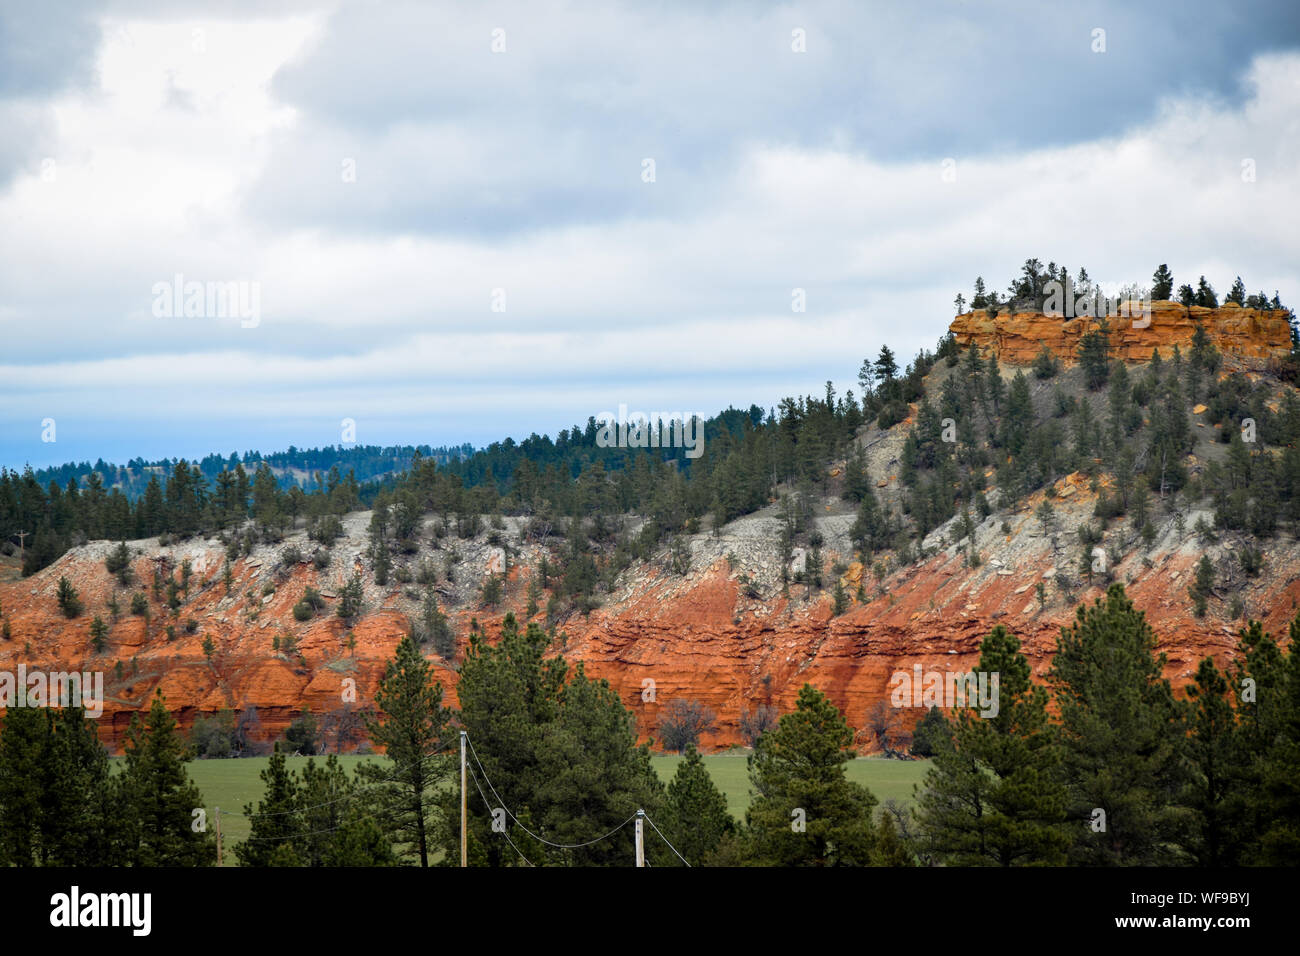 Trees Growing On Rock Formations Against Cloudy Sky At Black Hills Stock Photo